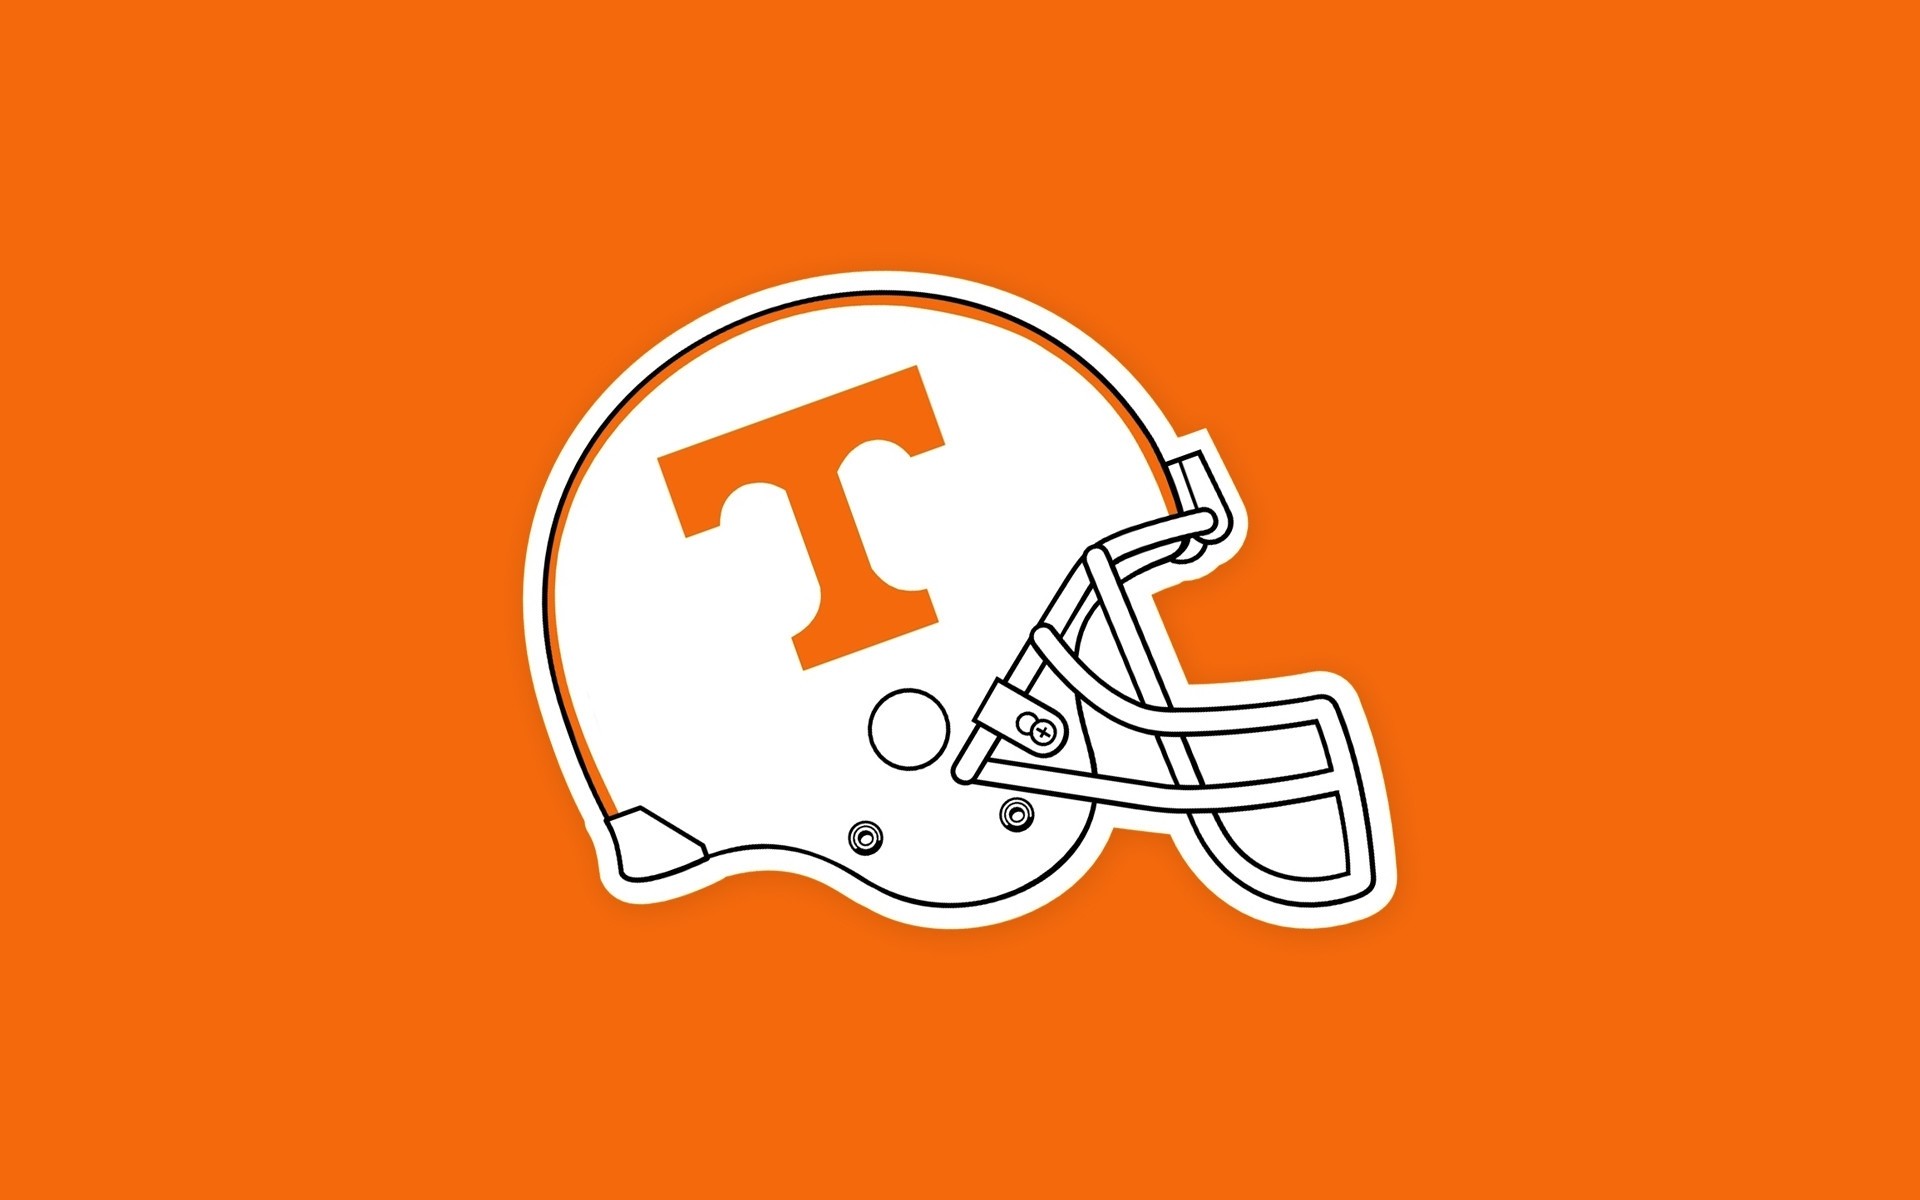 1920x1200 Title : tennessee vols iphone wallpaper (47+ images) Dimension : 1920 x  1200. File Type : JPG/JPEG